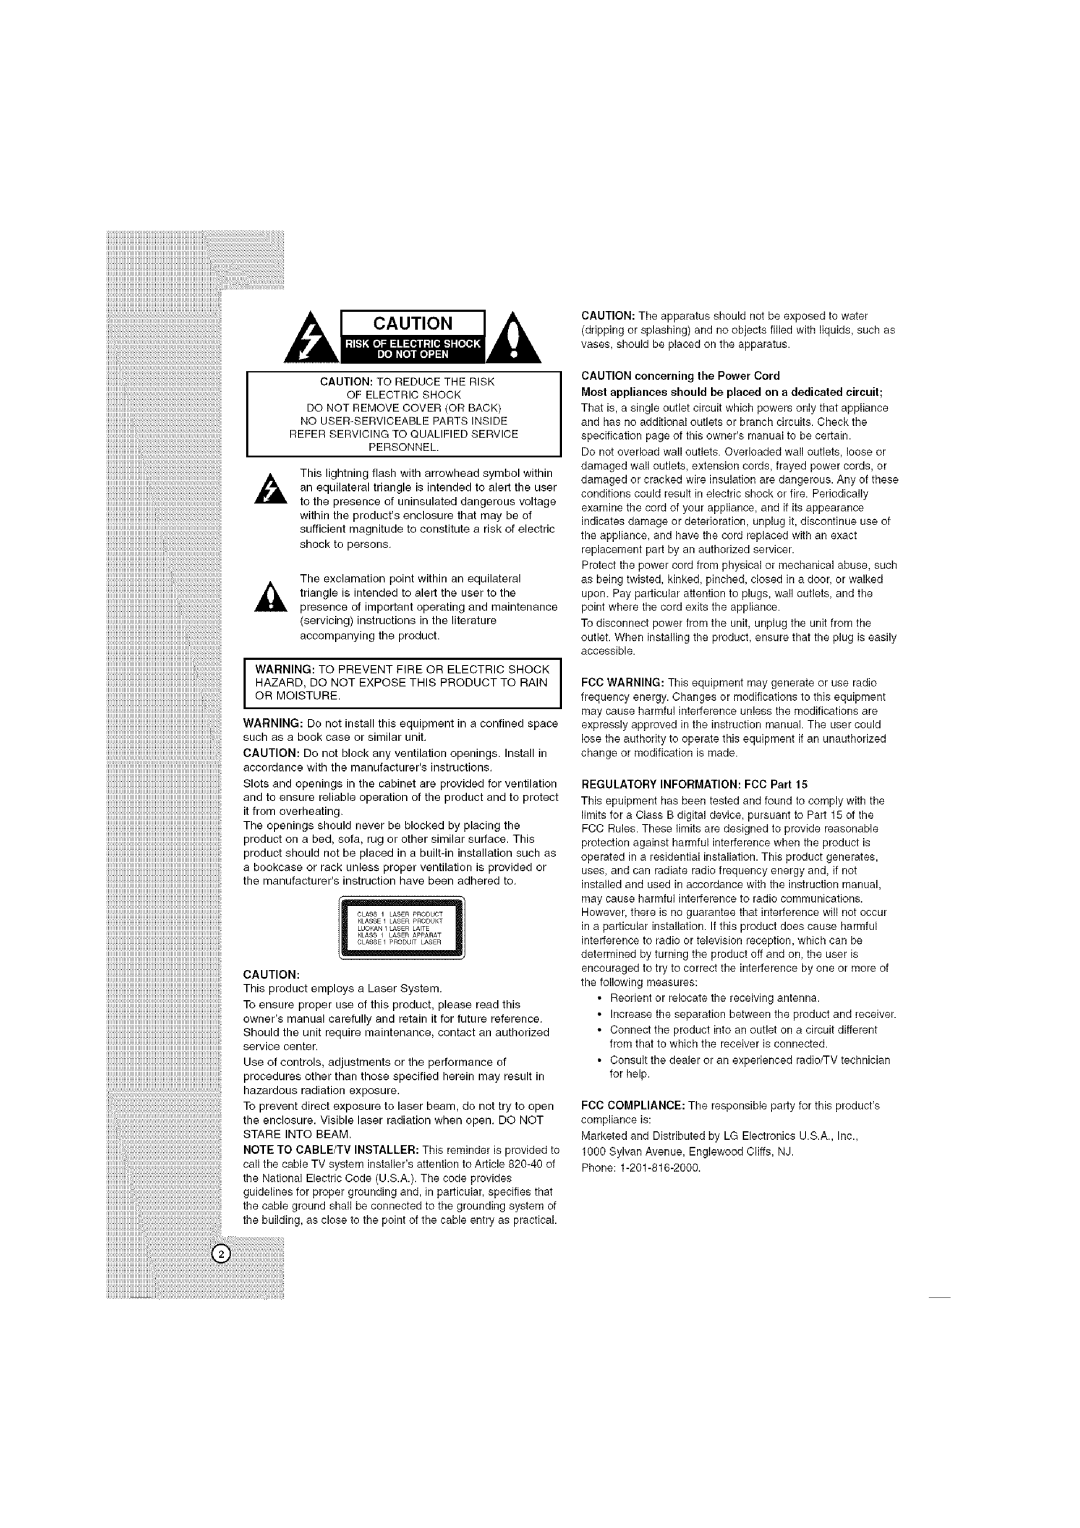 LG Electronics LHT764 owner manual CAUTION concerning the Power Cord, REGULATORY INFORMATION FCC Part 